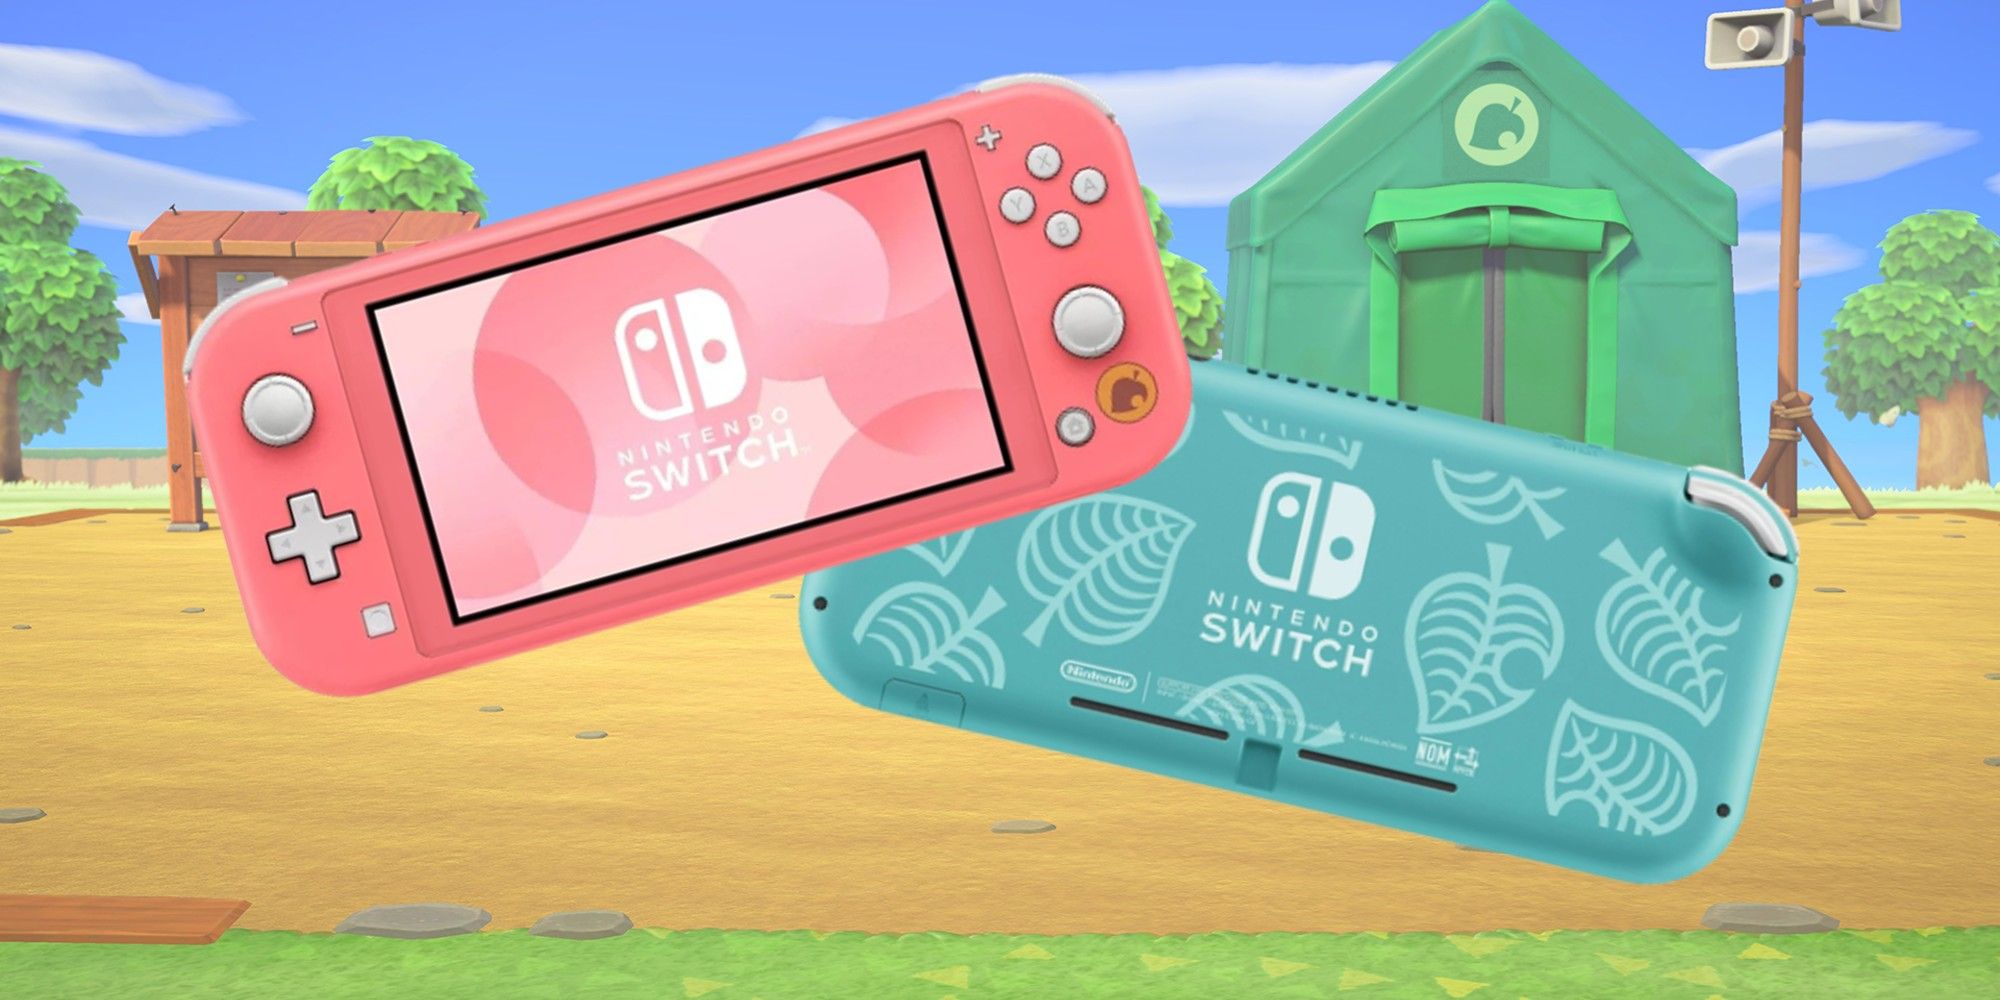 animal crossing nintendo switch lites on an animal crossing background